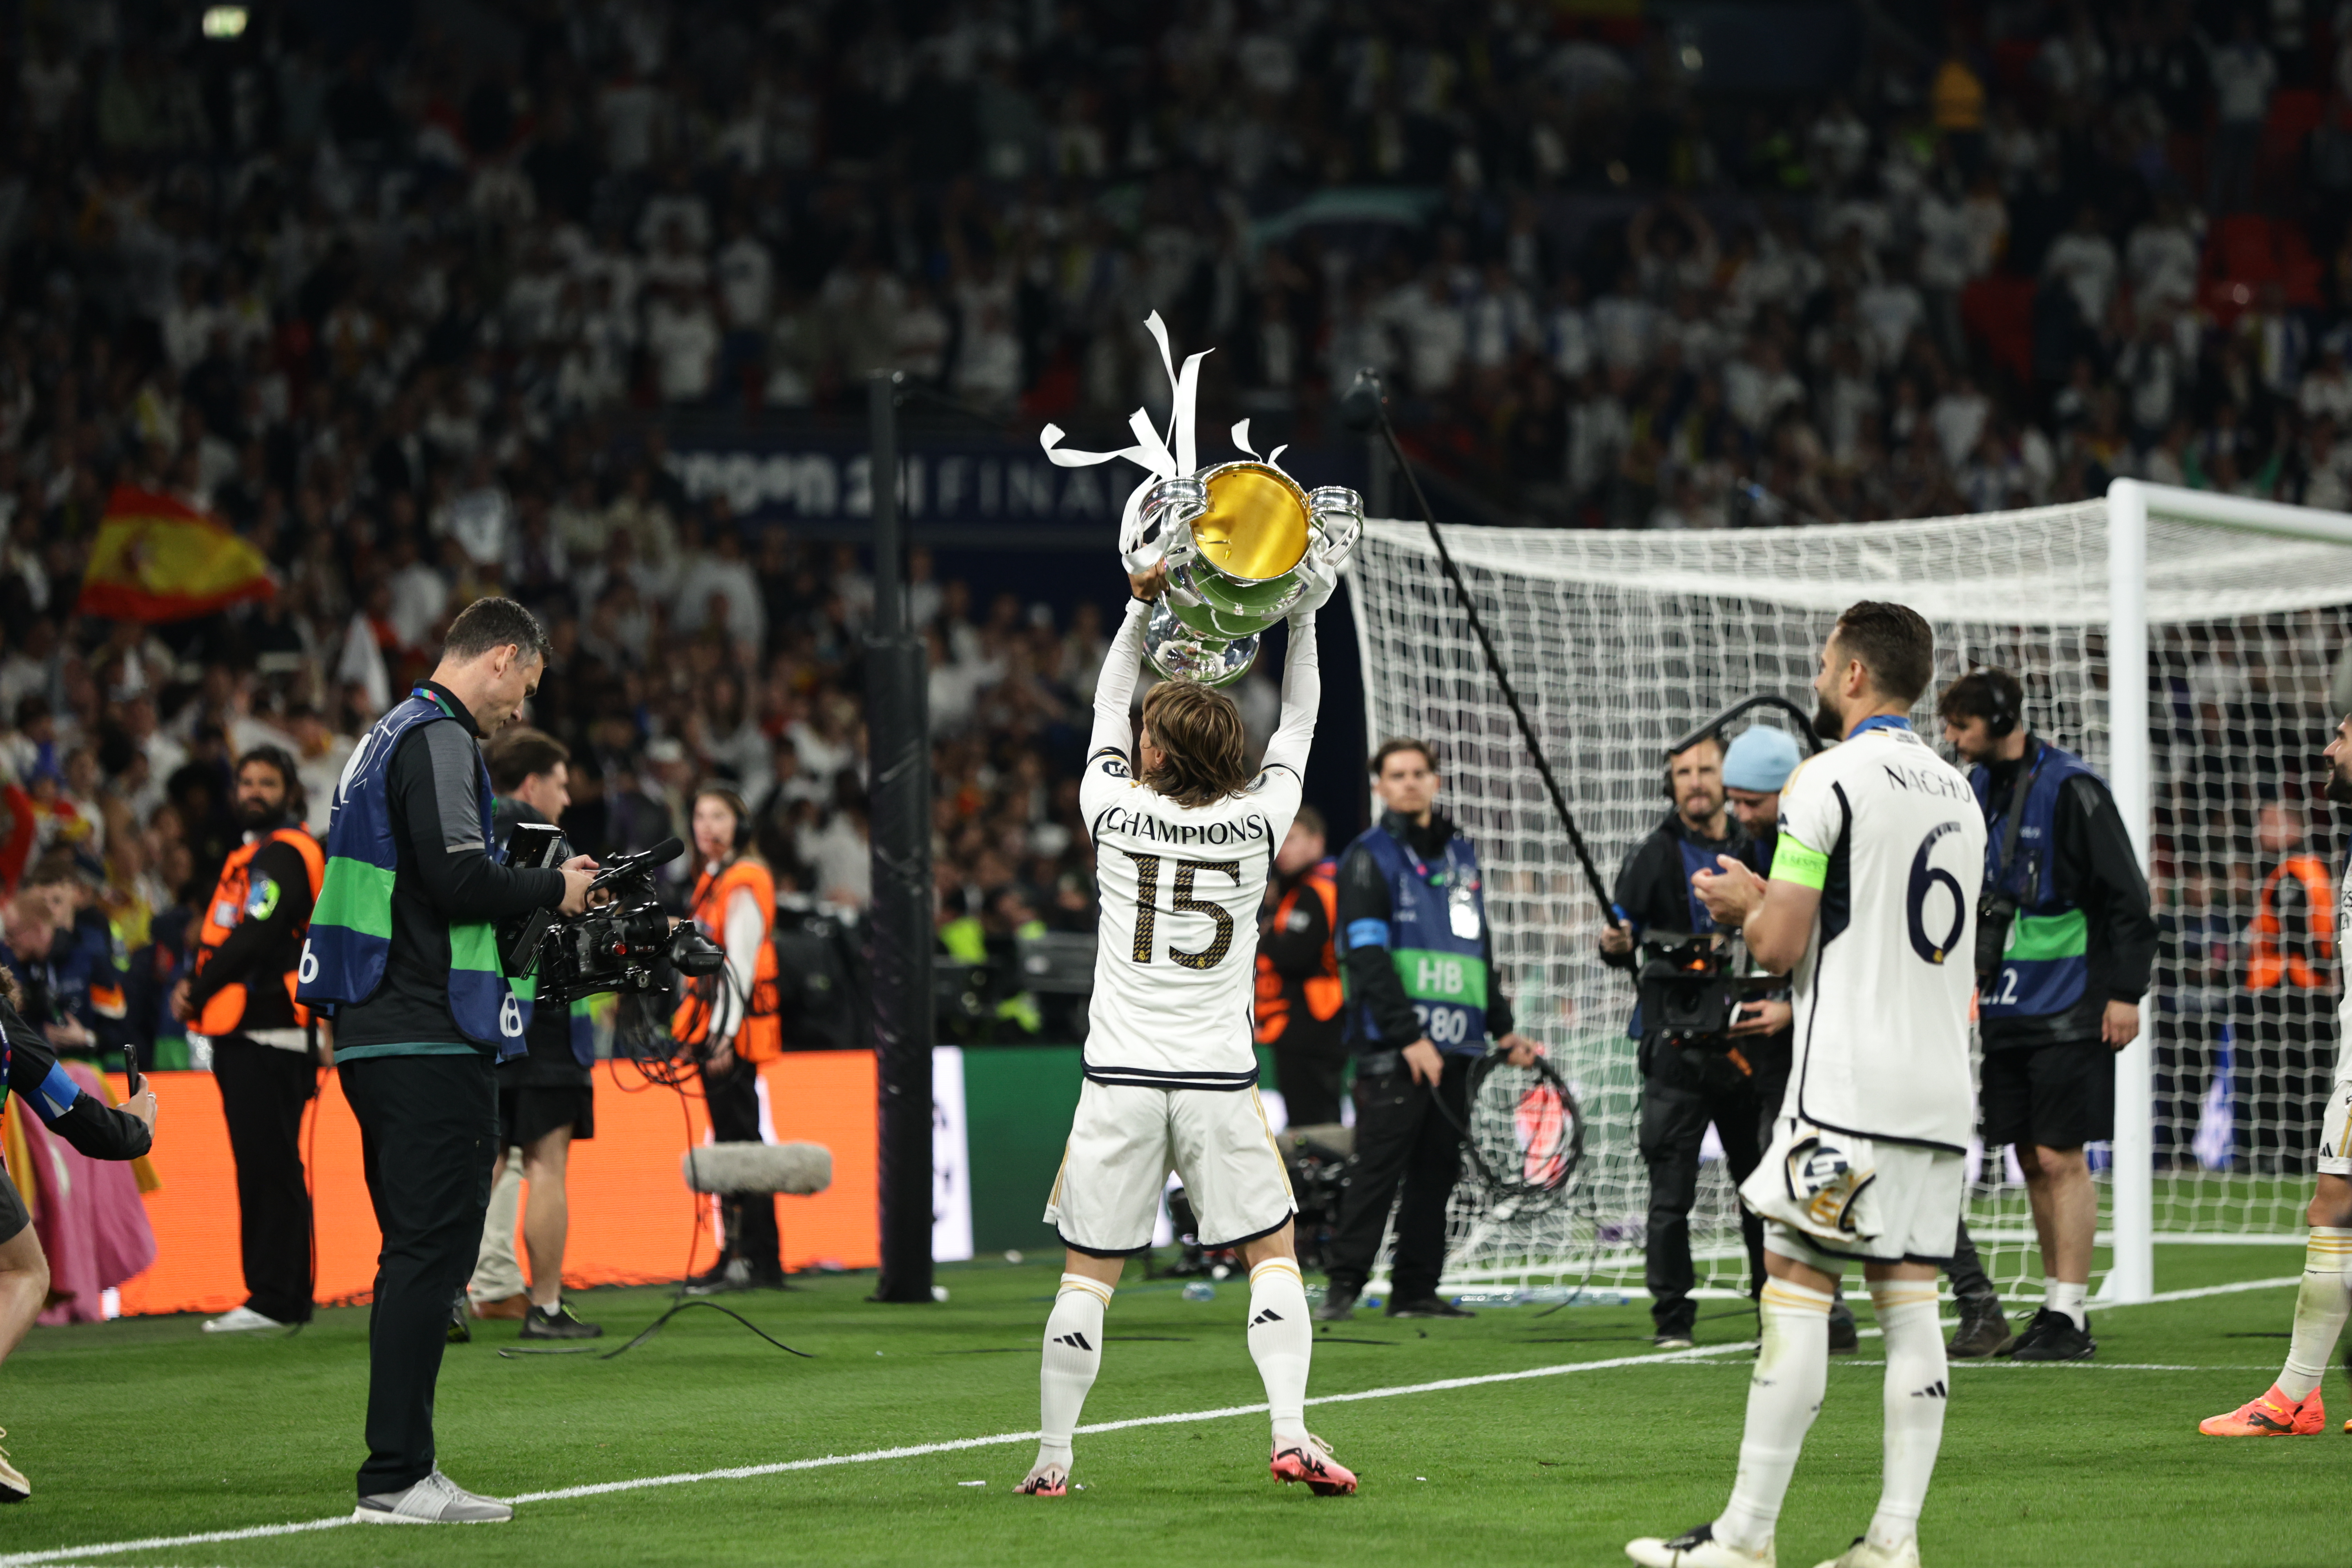 Real Madrid win 2024 UEFA Champions League trophy, beating Borussia Dortmund 2-0 in final